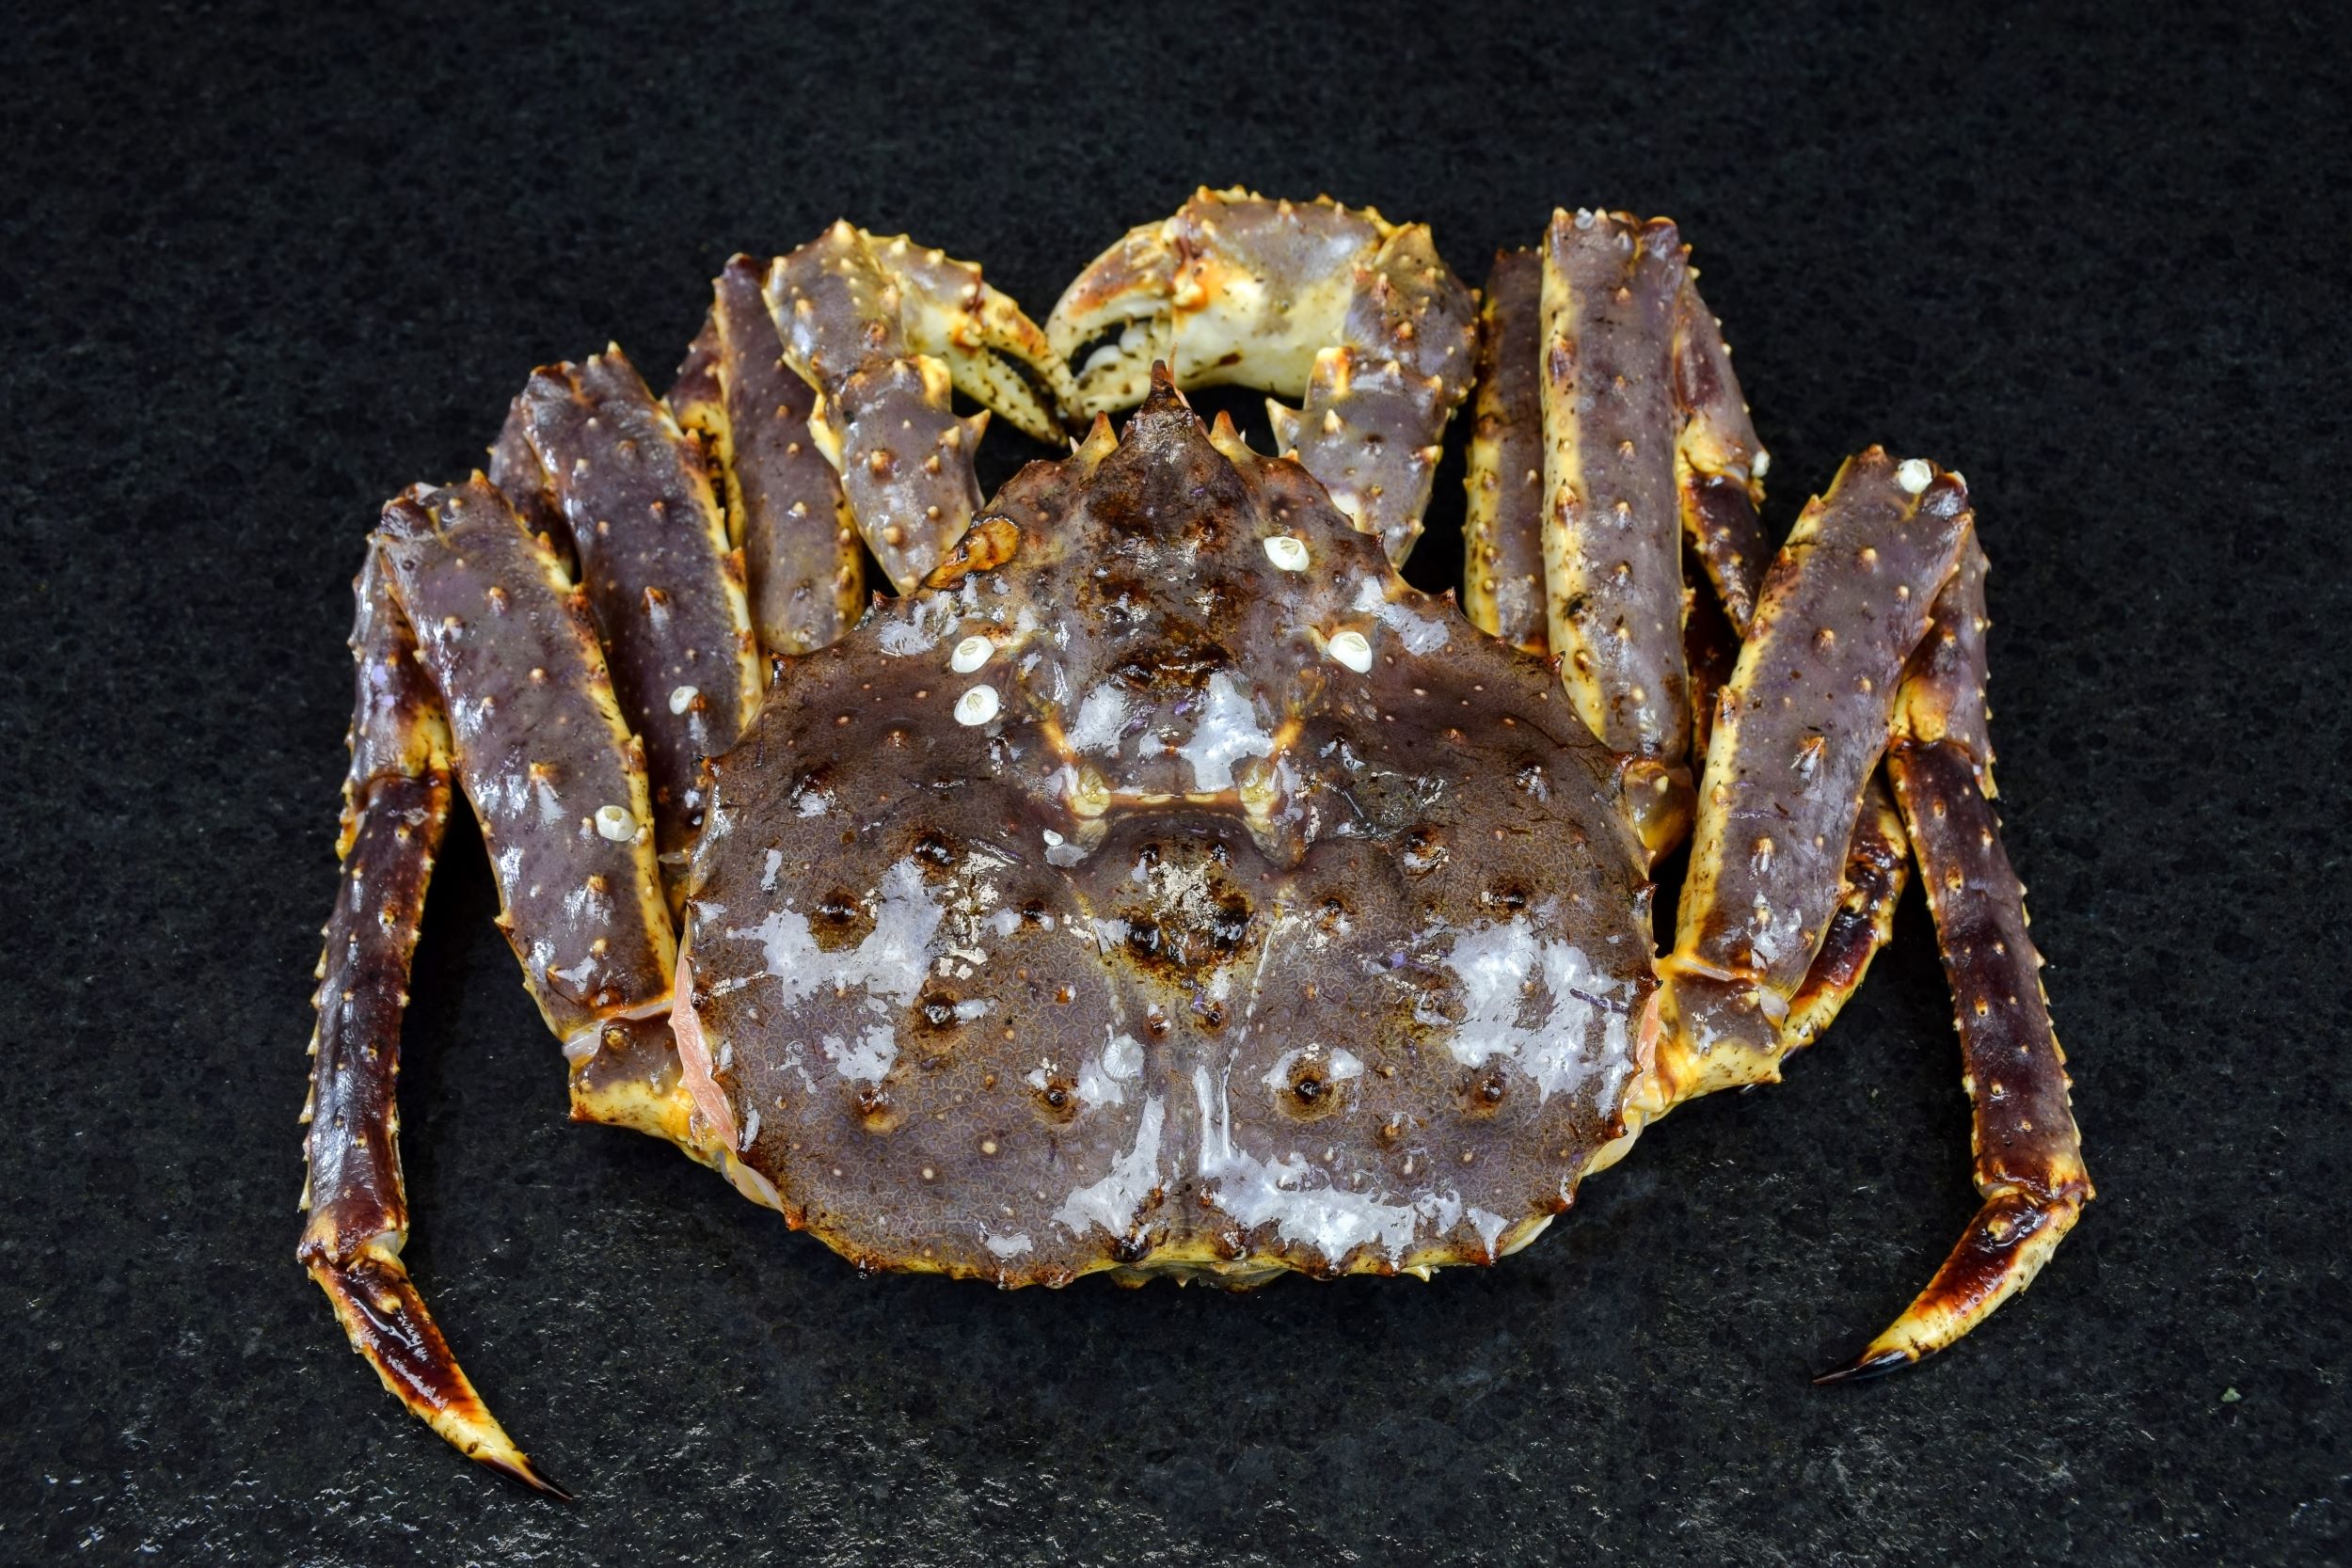 Russia aims to develop crab market